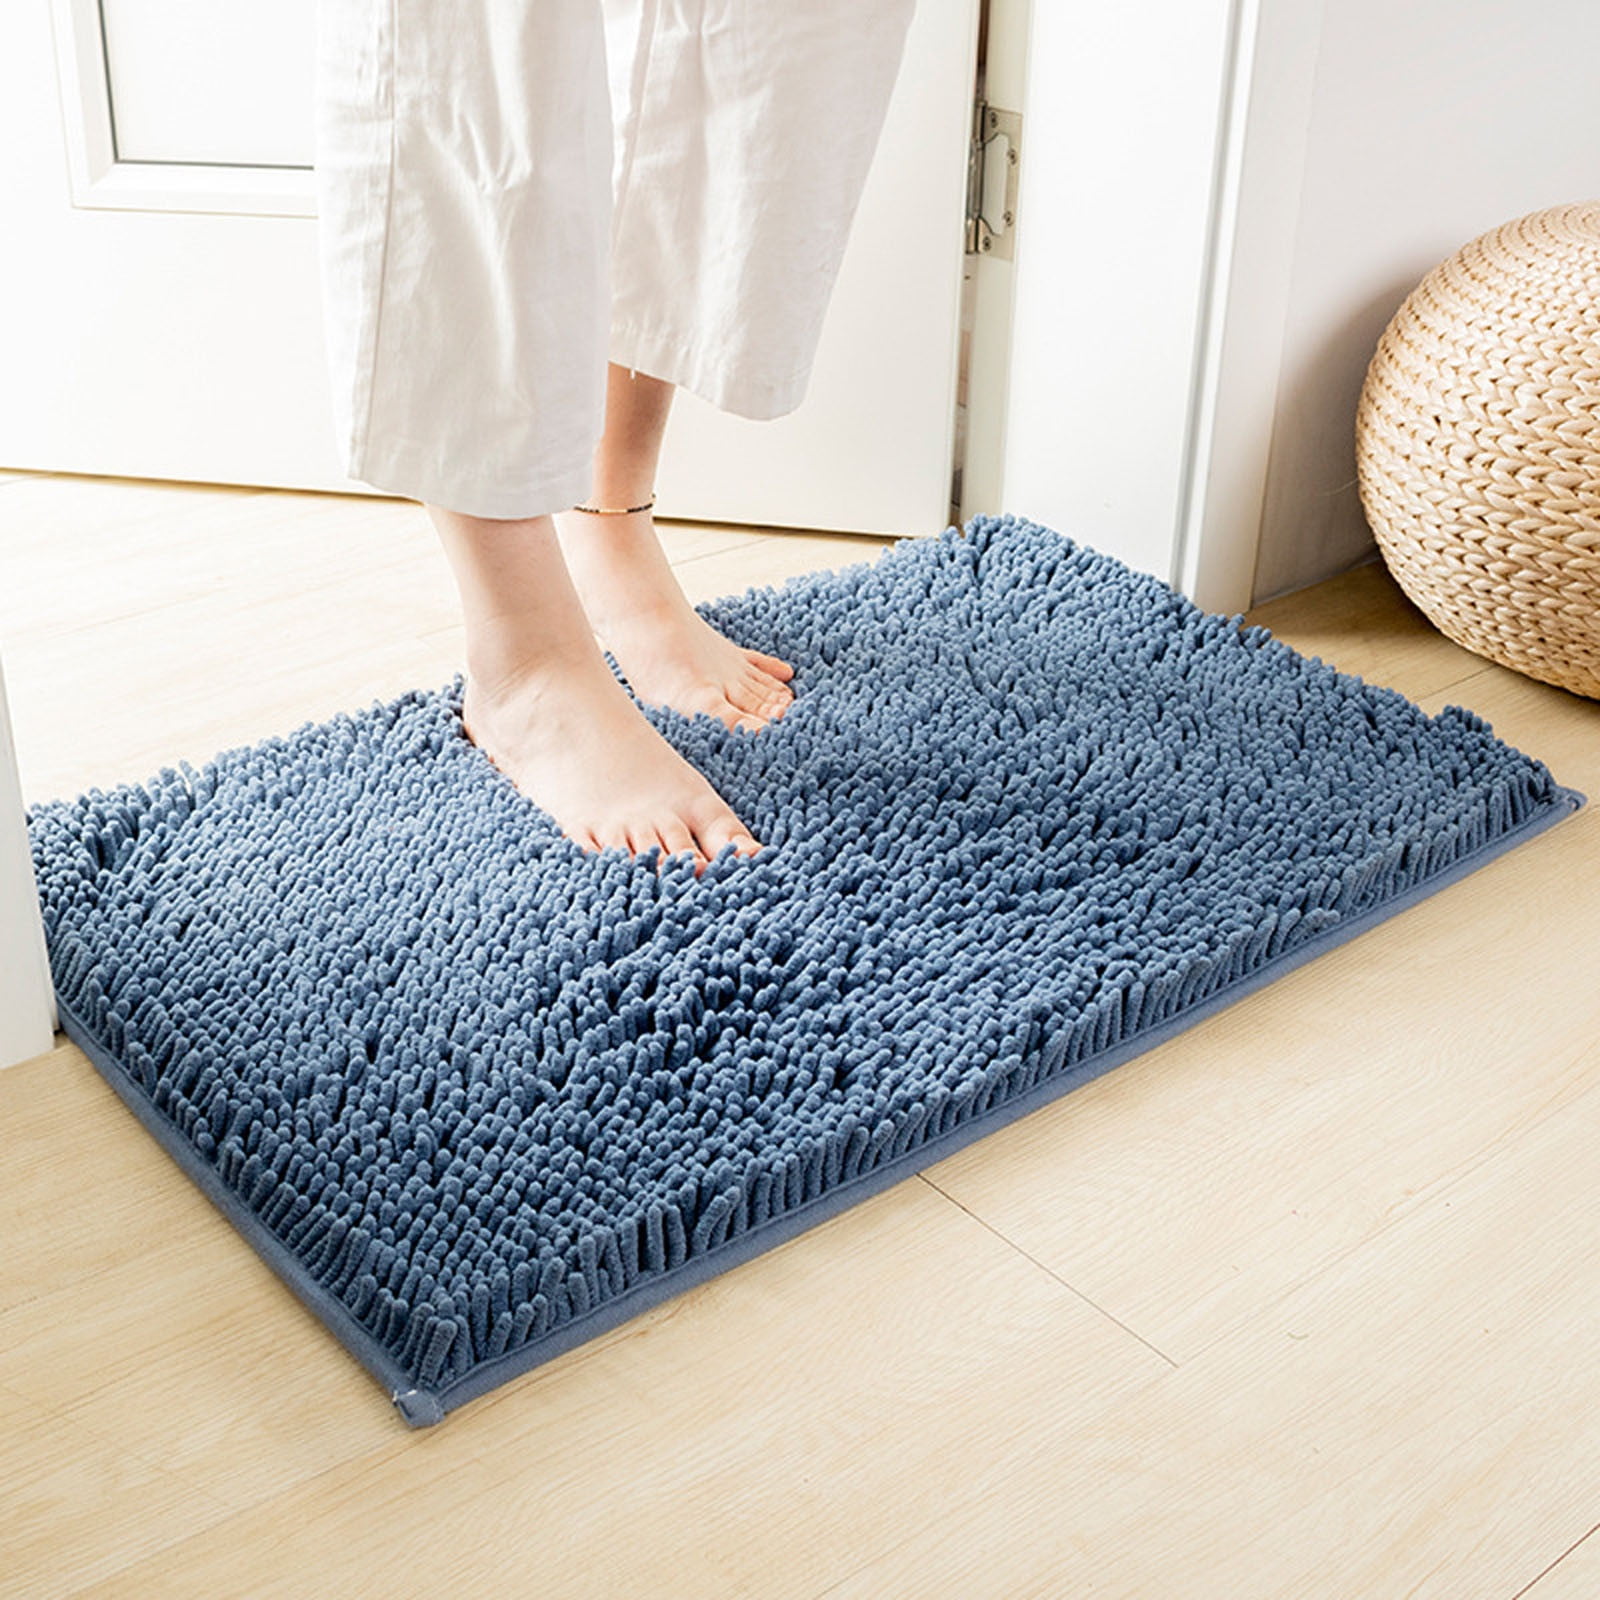  WODEJIA Non Slip Bath Rugs Sponge Foam for Bathroom,Durable  Soft Flannel Mat Bright 3D Print Rug for Living Room, Clearance MatS for  Forlaundry Room and Kitchen, Moroccan Lattice Decor carpt 